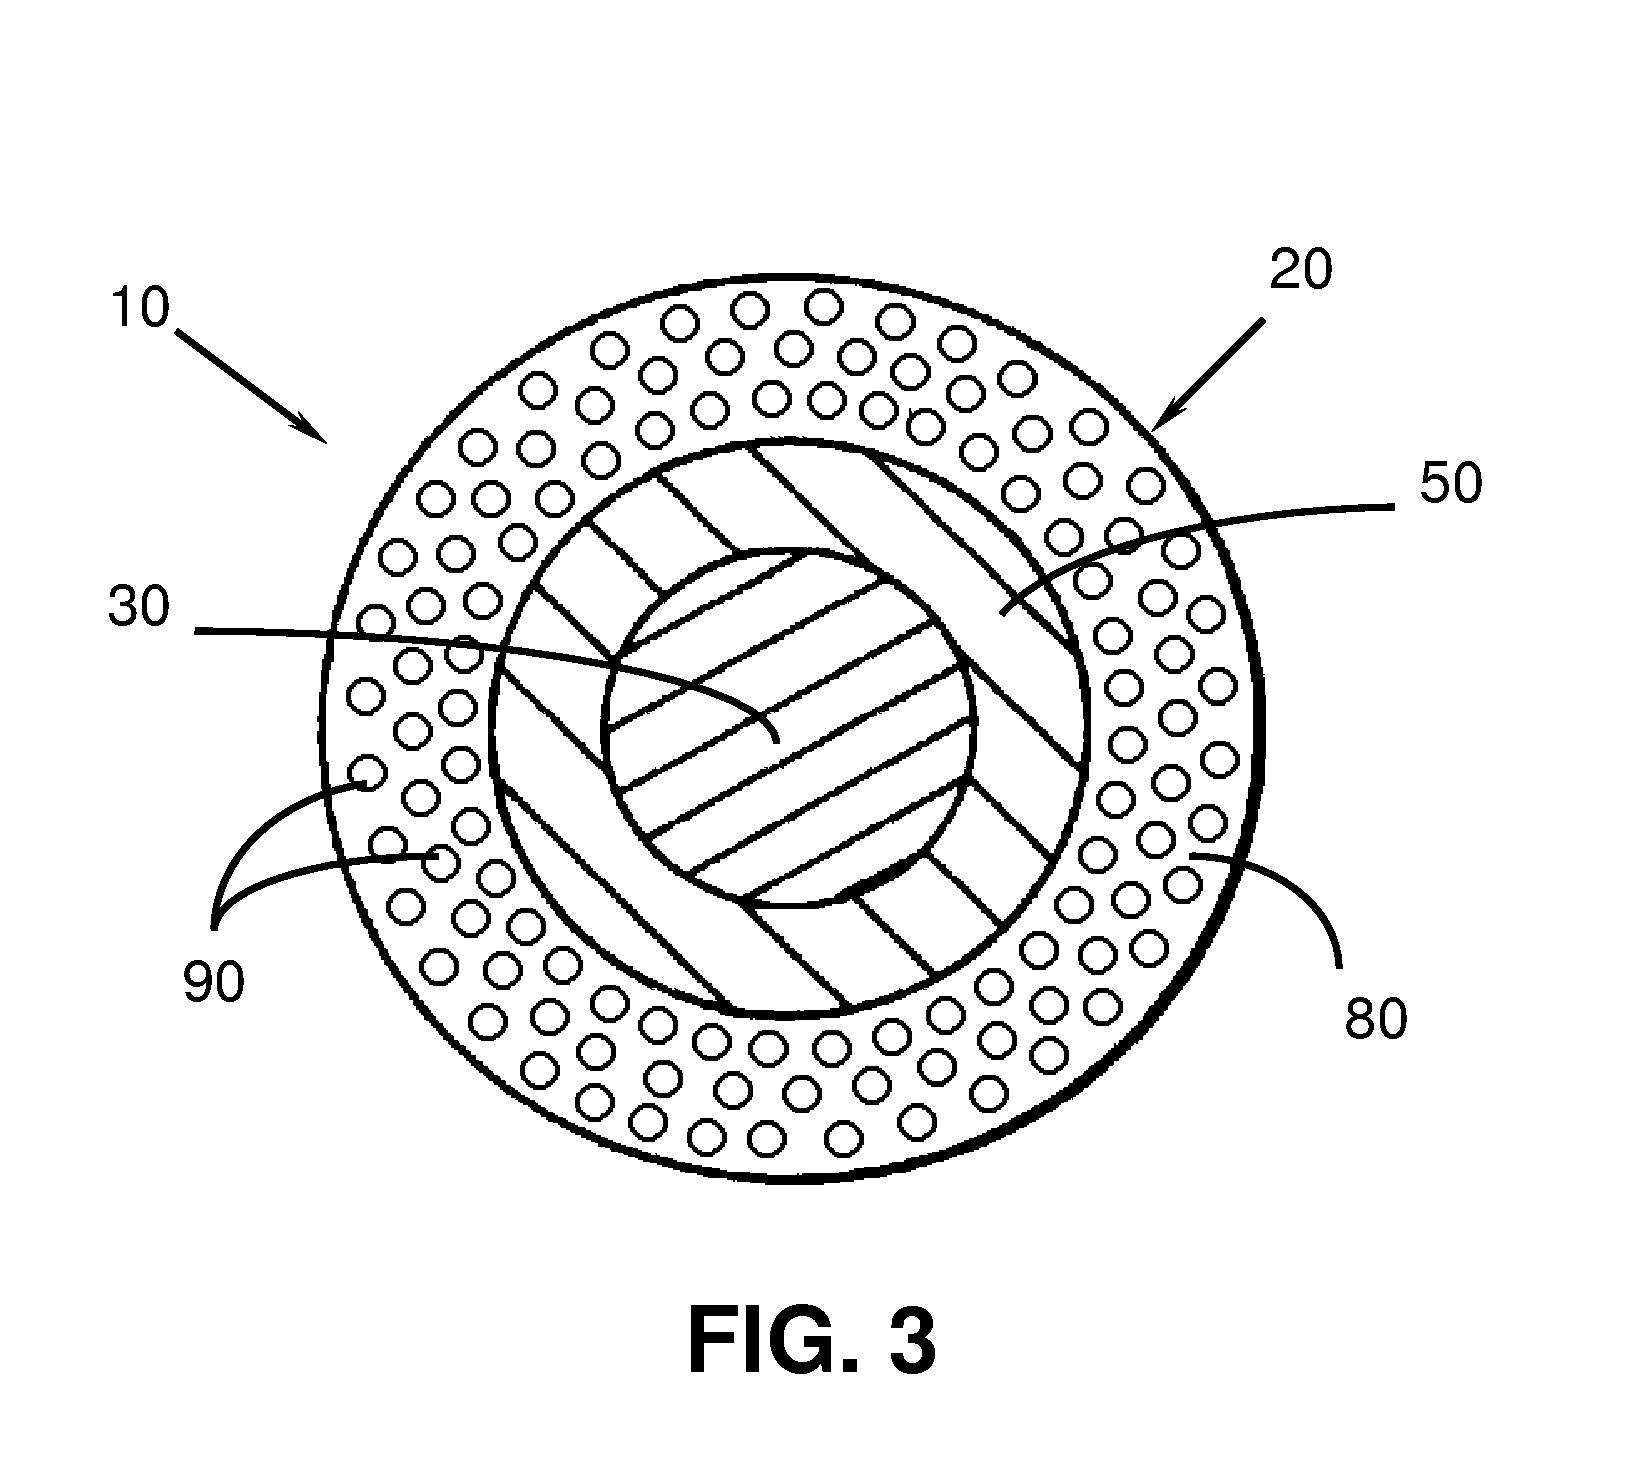 Magnet wire with coating added with fullerene-type nanostructures